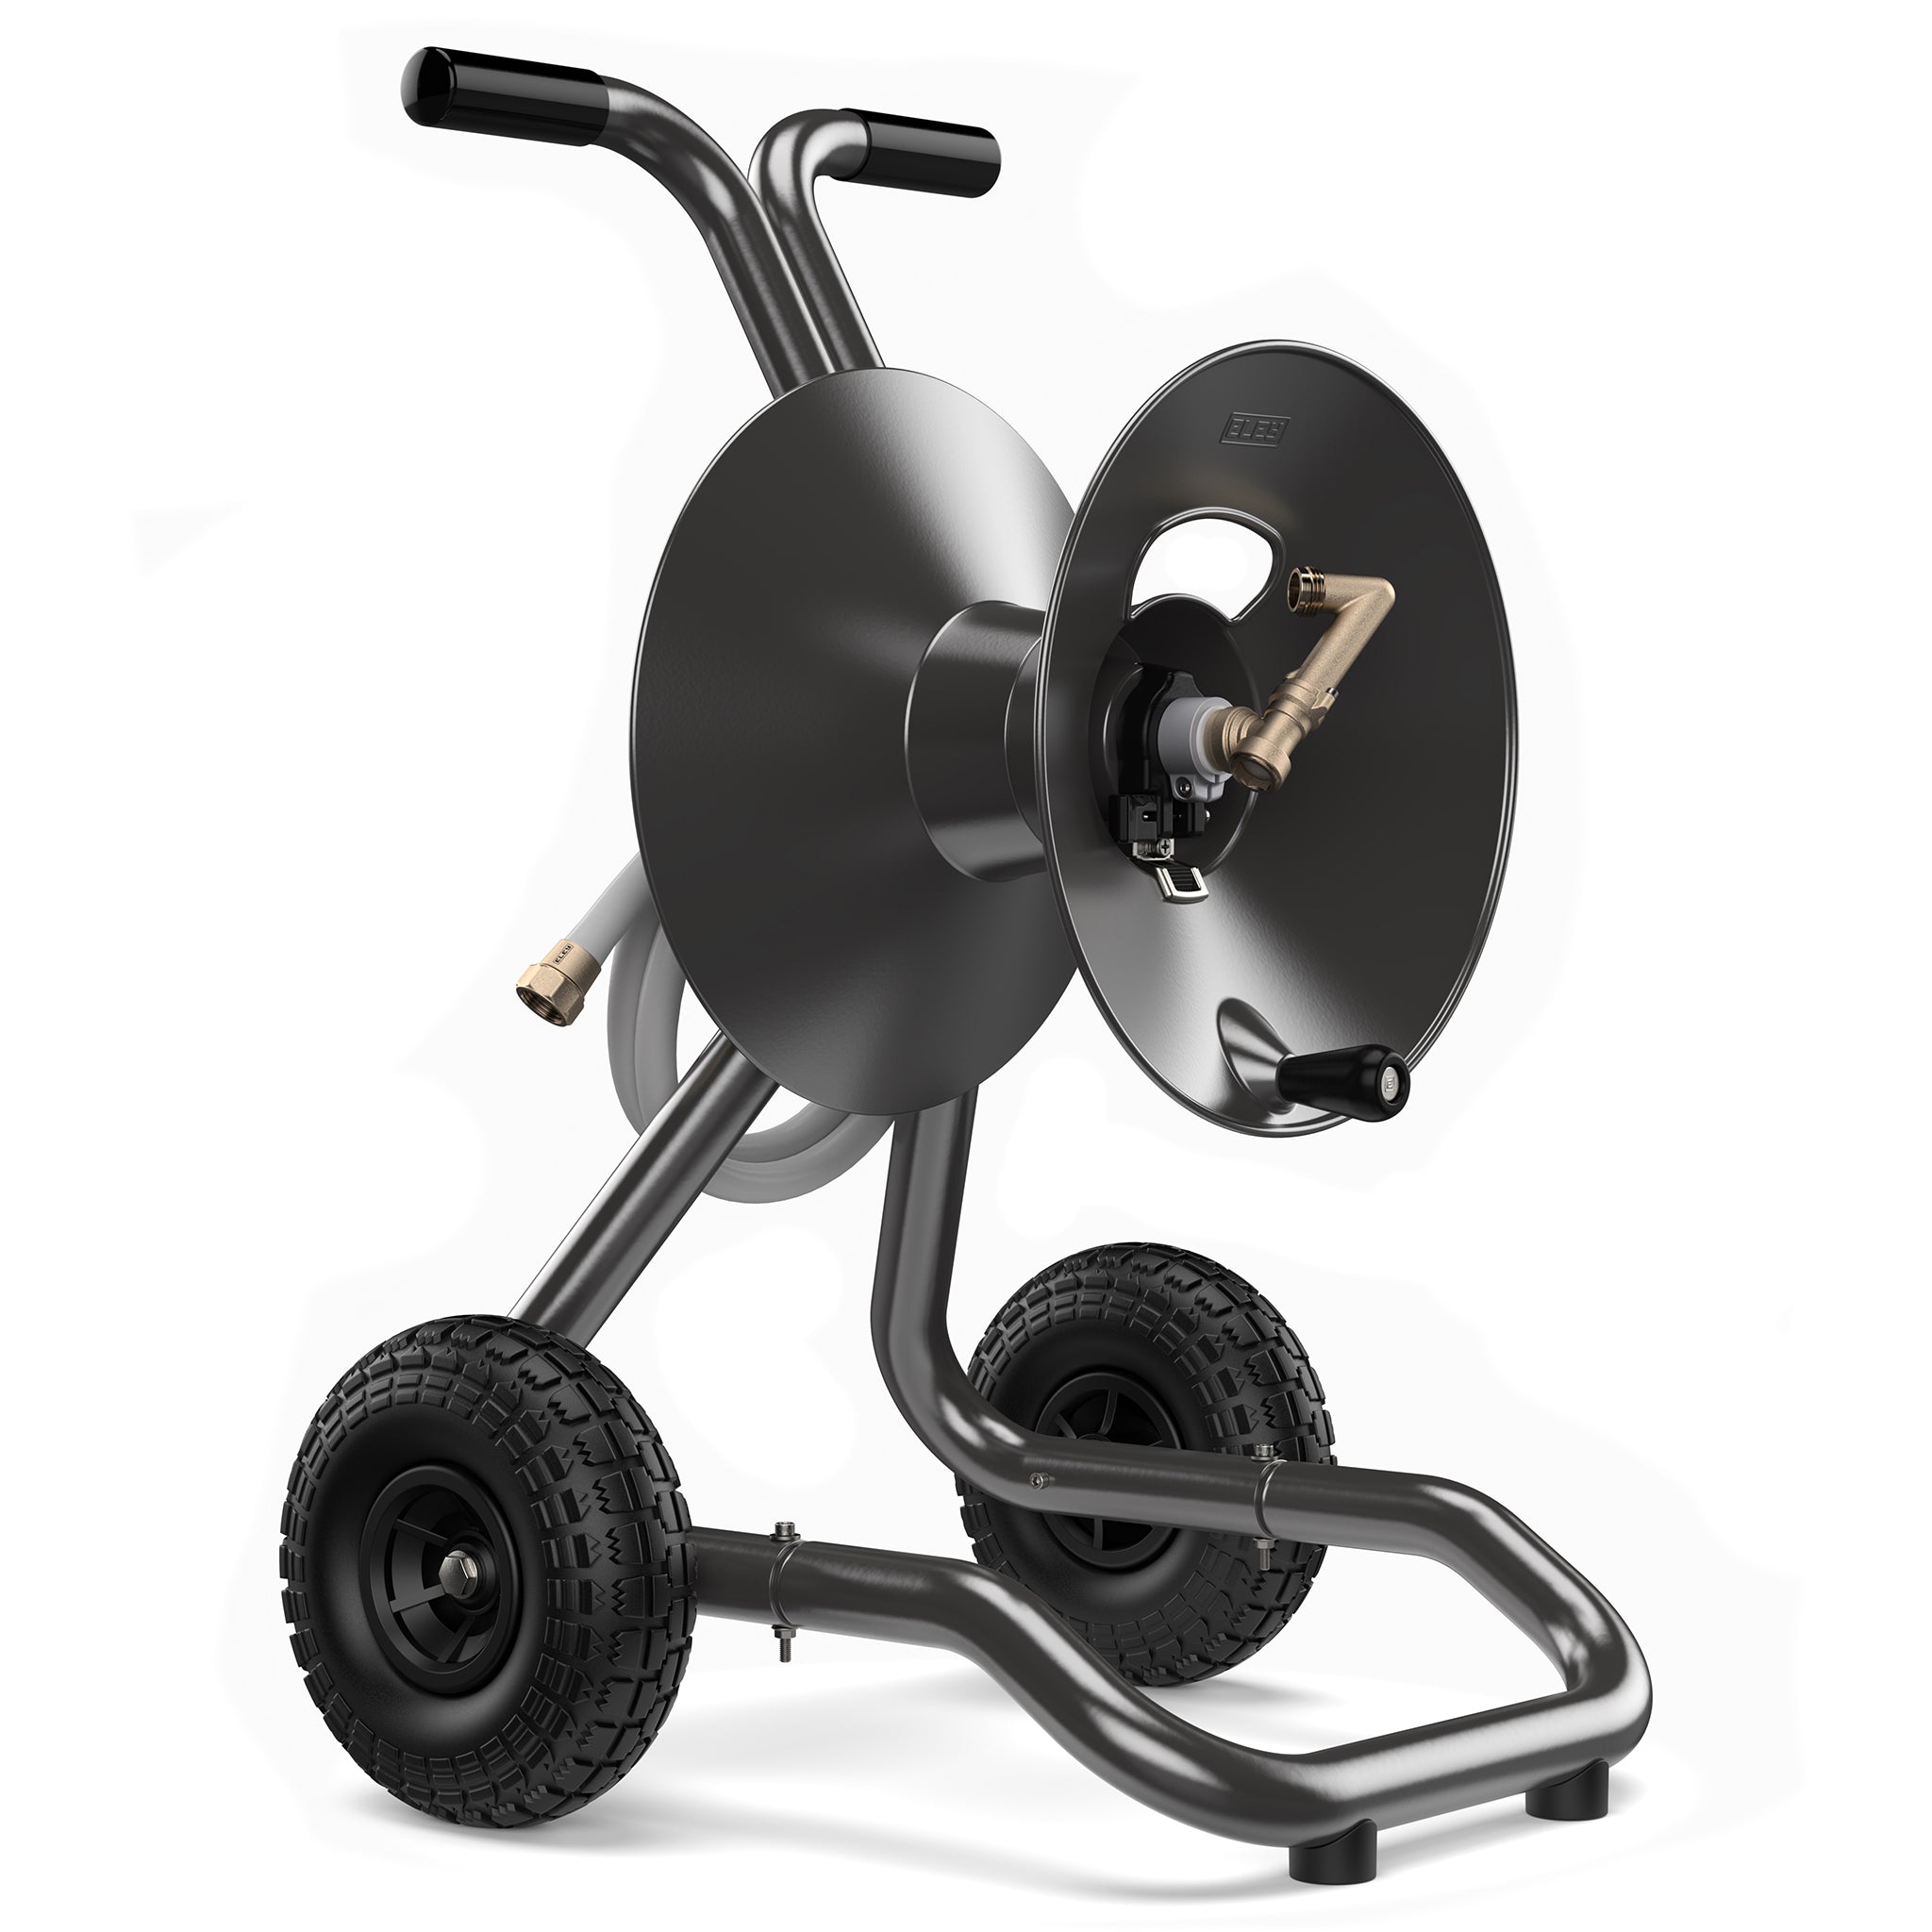 Garden Hose Reel - Hose Pipe Reel Latest Price, Manufacturers & Suppliers